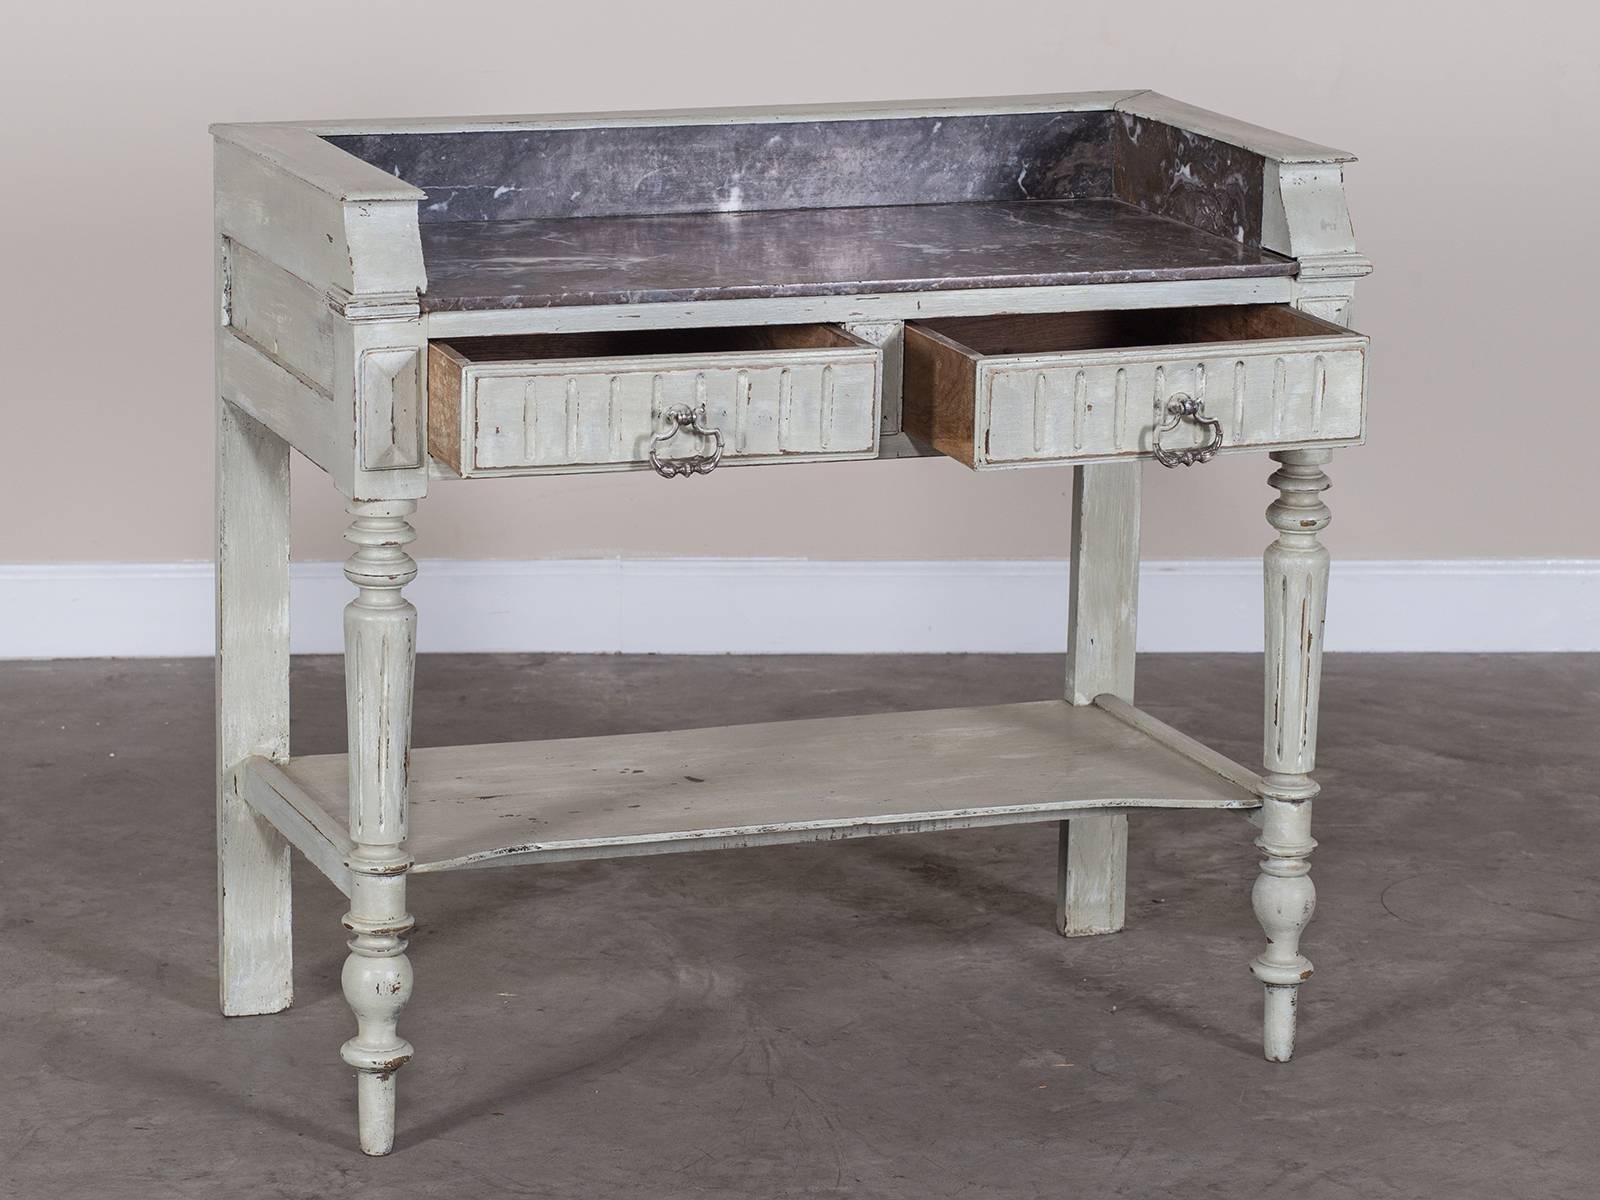 Receive our new selections direct from 1stdibs by email each week. Please click Follow Dealer below and see them first!

The handsome profile of this antique French washstand table, circa 1880 gives it a sense of solidity and usefulness. The